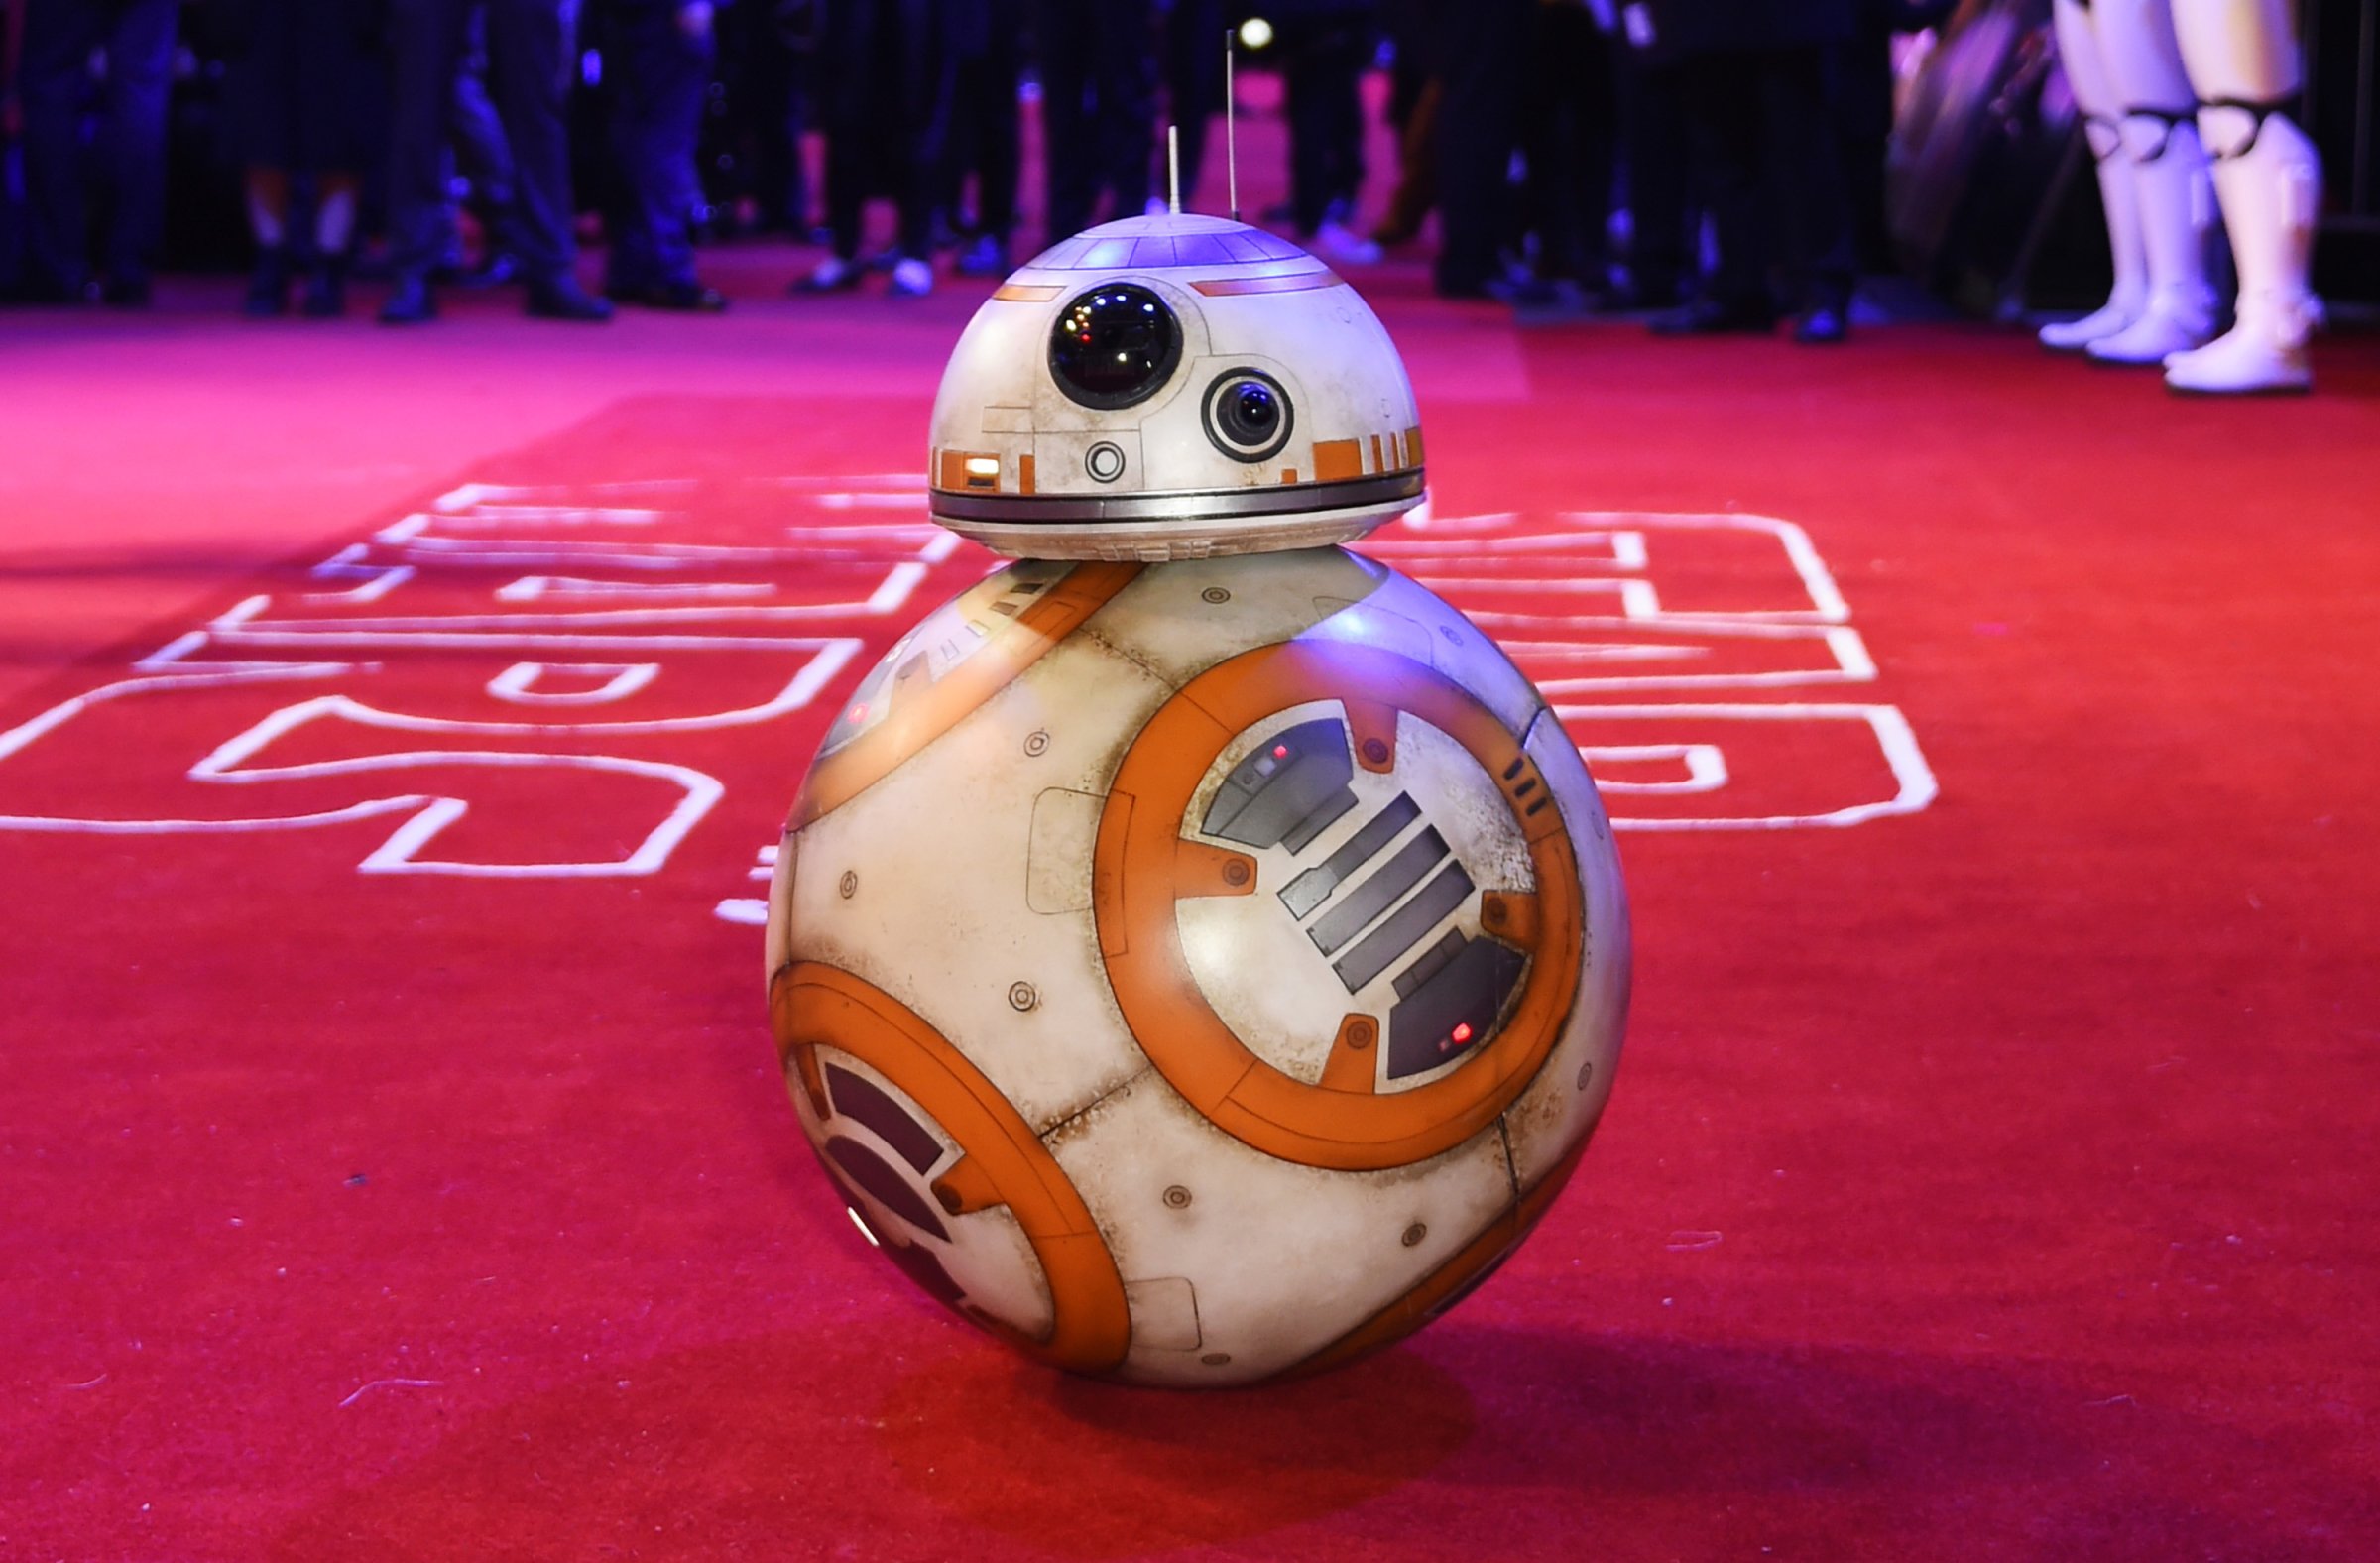 Droid BB-8 attends the European Premiere of "Star Wars: The Force Awakens" on December 16, 2015 in London, England.